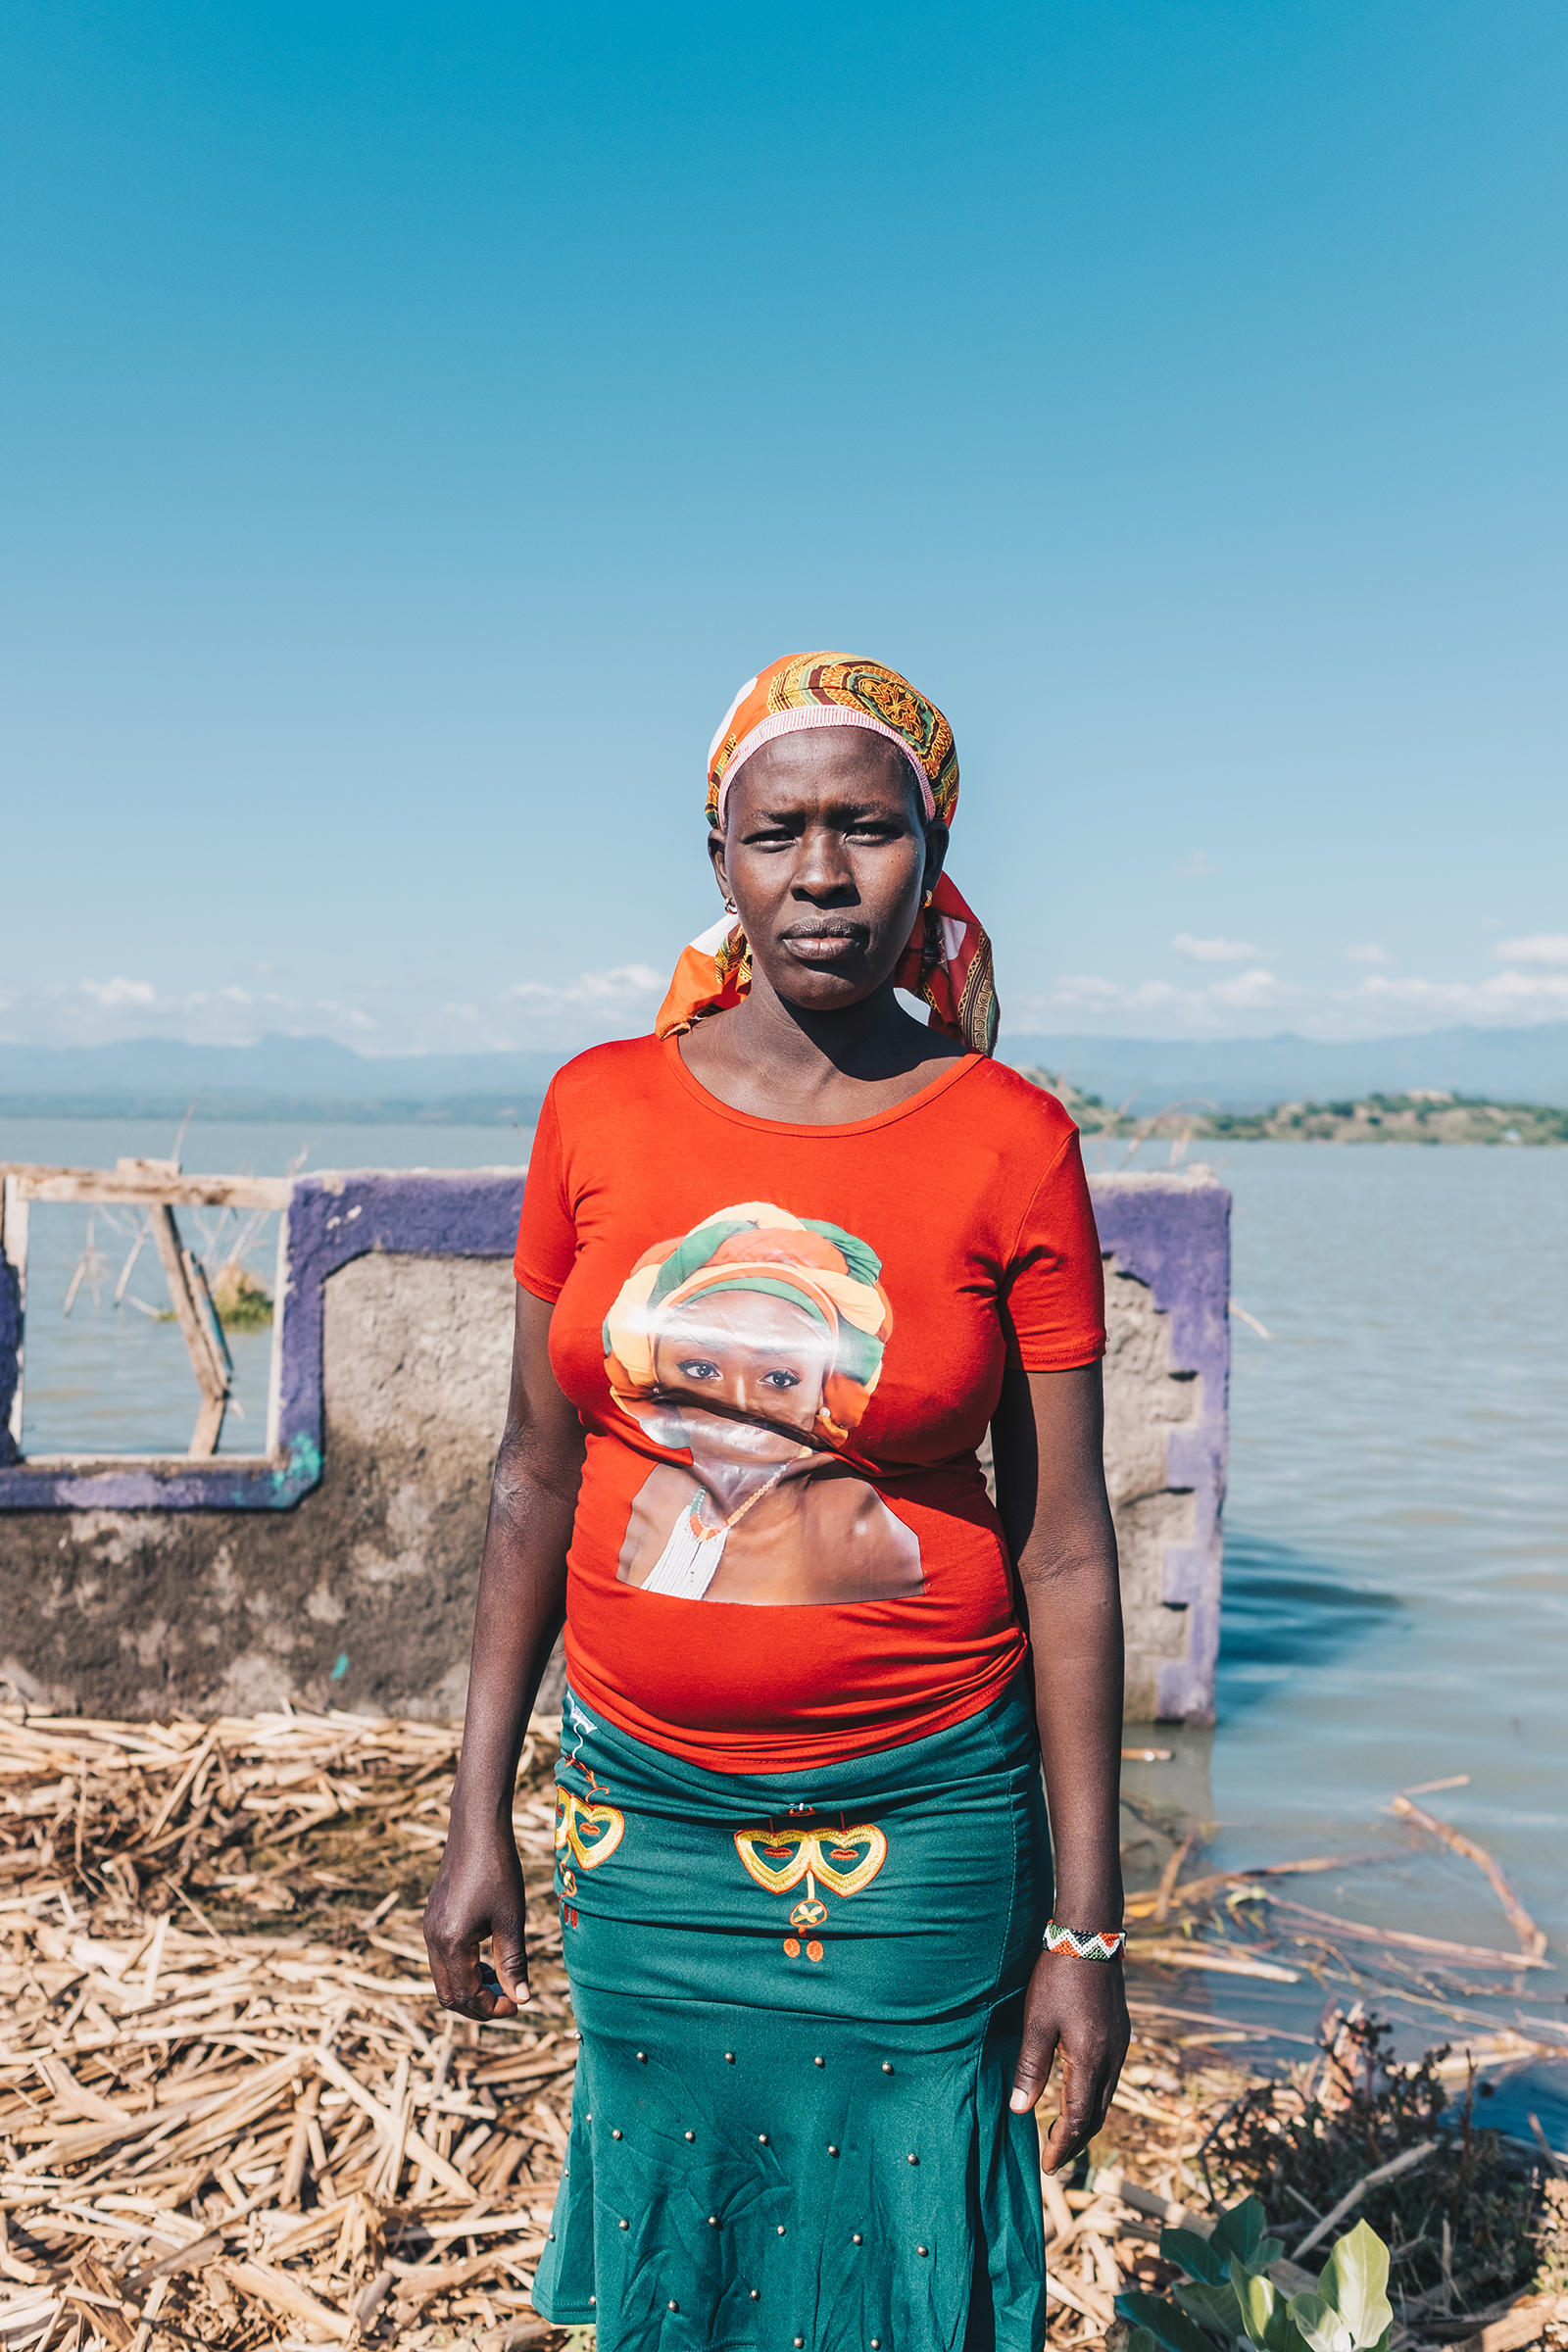 Judy Lewiri stands next to her former home on Ol Kokwe, an island within Lake Baringo. She was forced to move to higher ground and rebuild on borrowed land. (Khadija M. Farah for TIME)